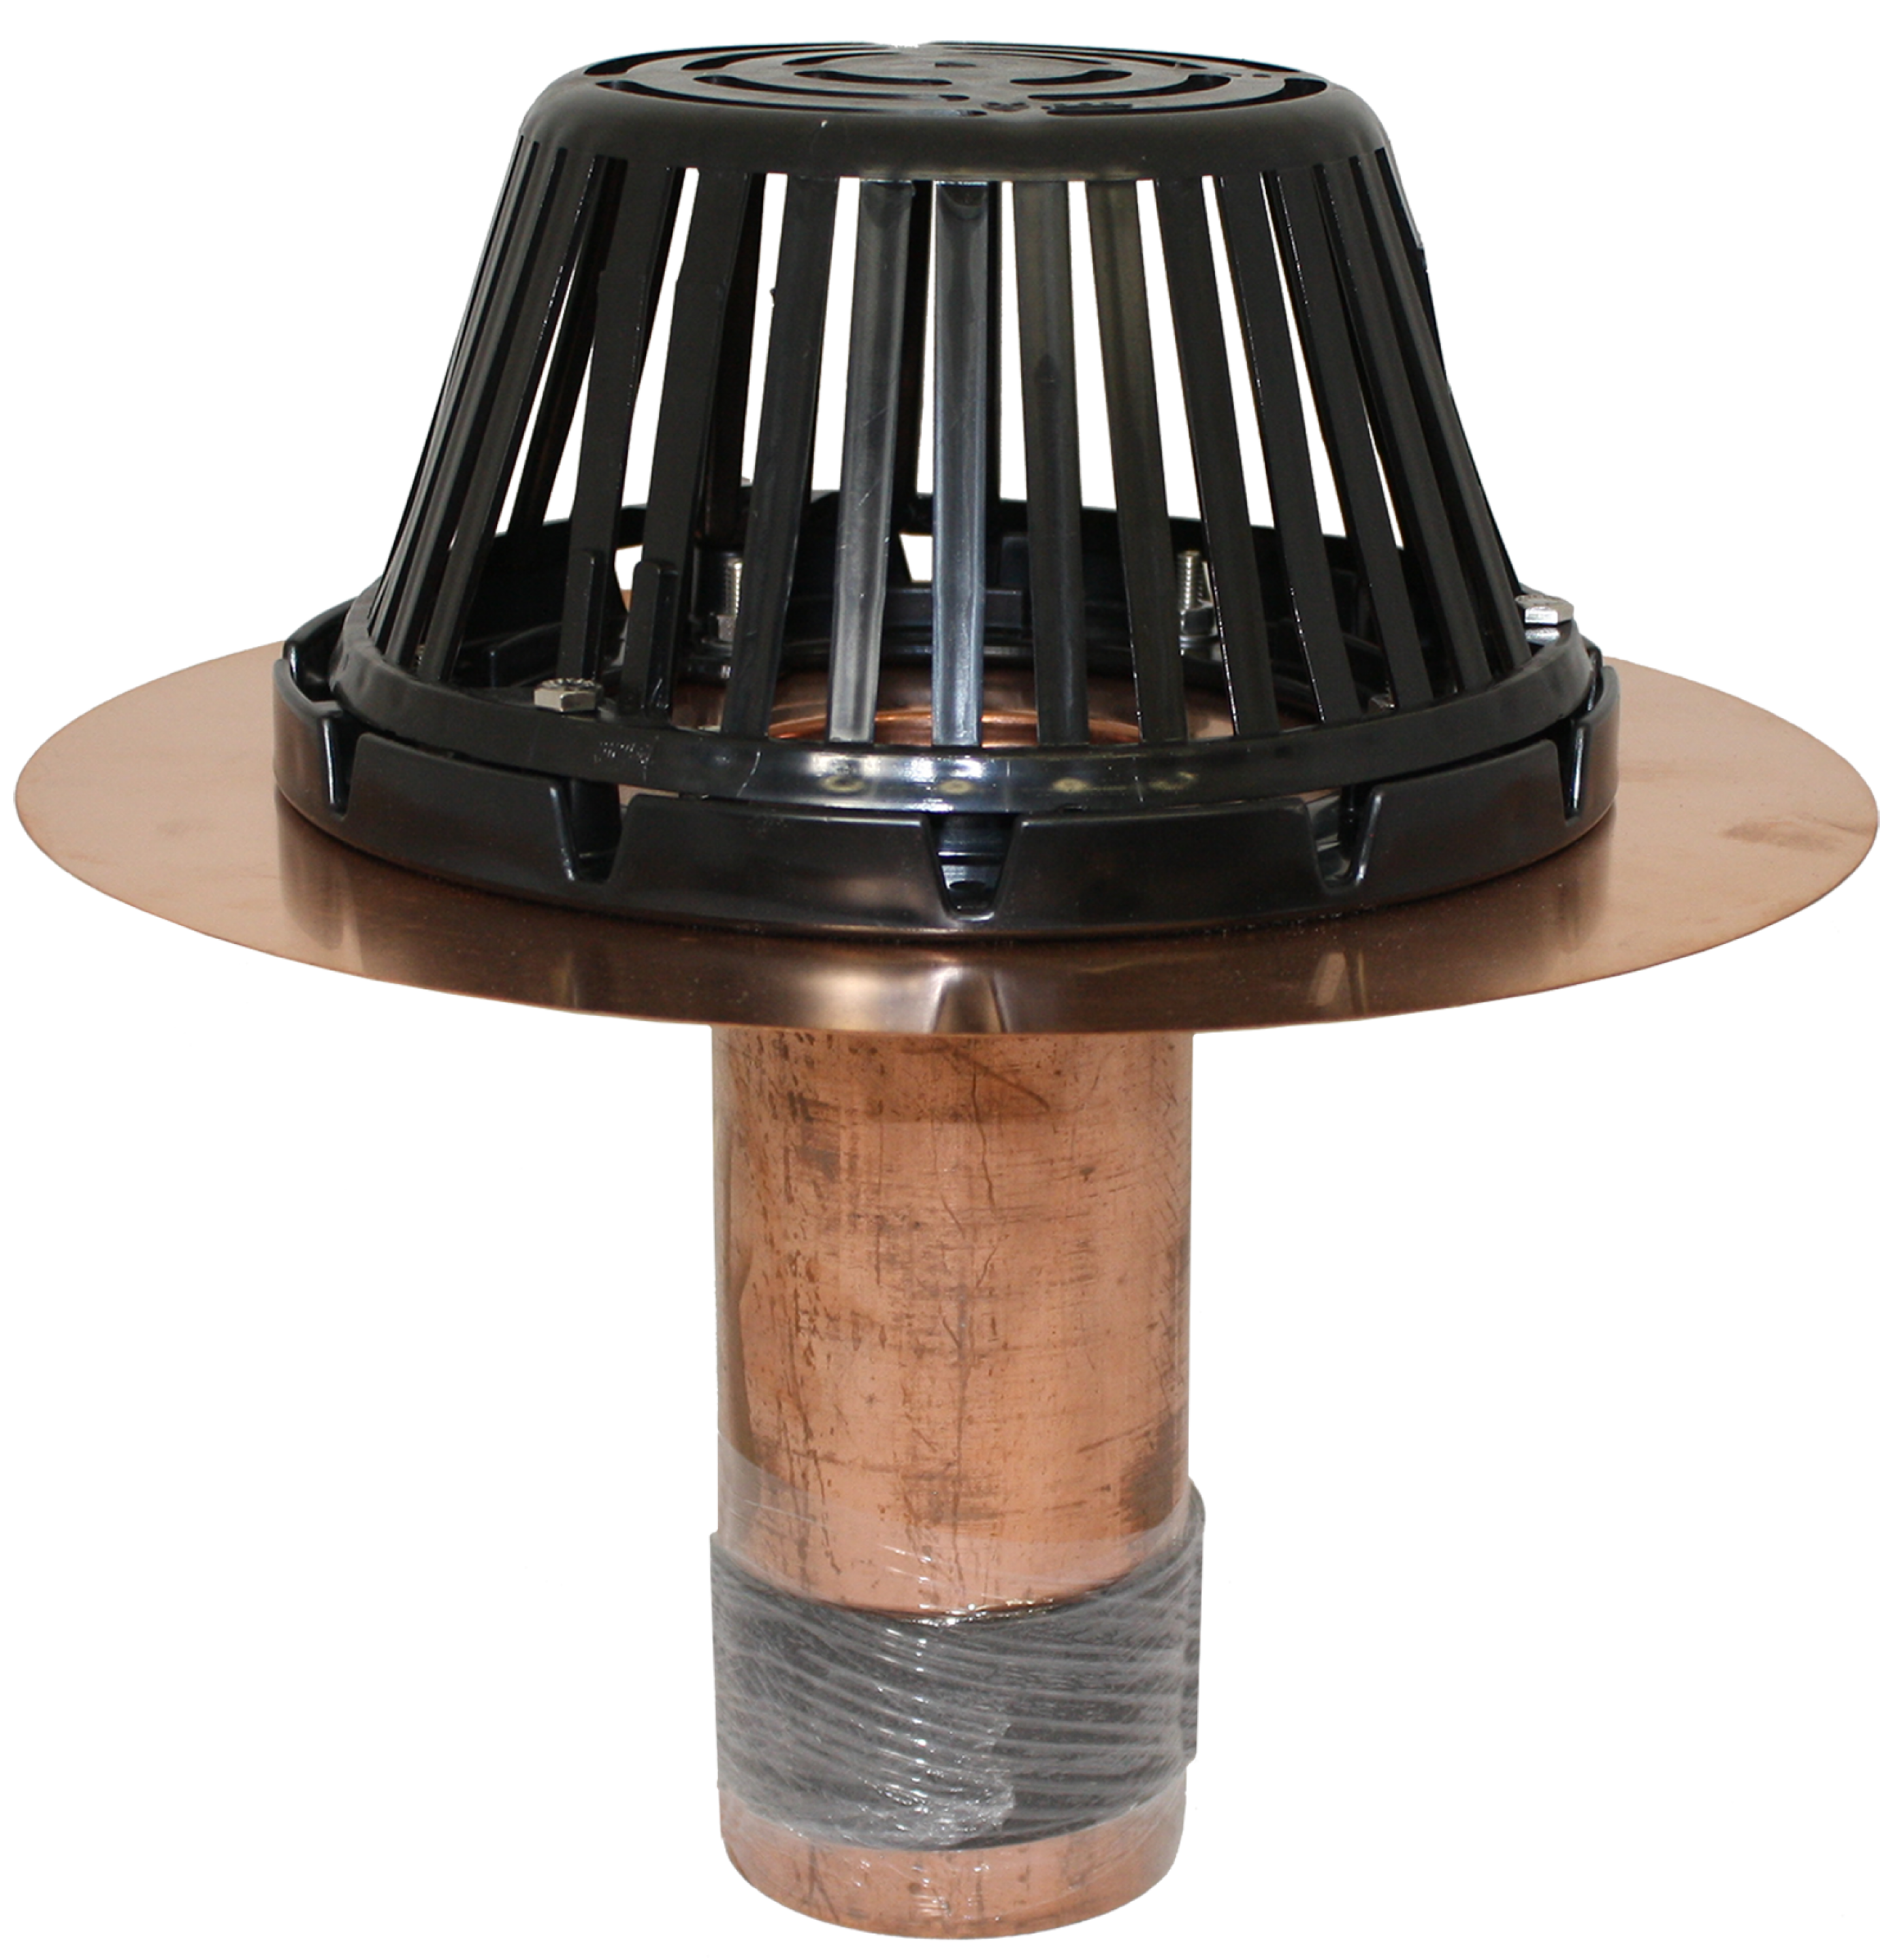 CopperTite Roof Drain Marathon Roofing Products, Inc.